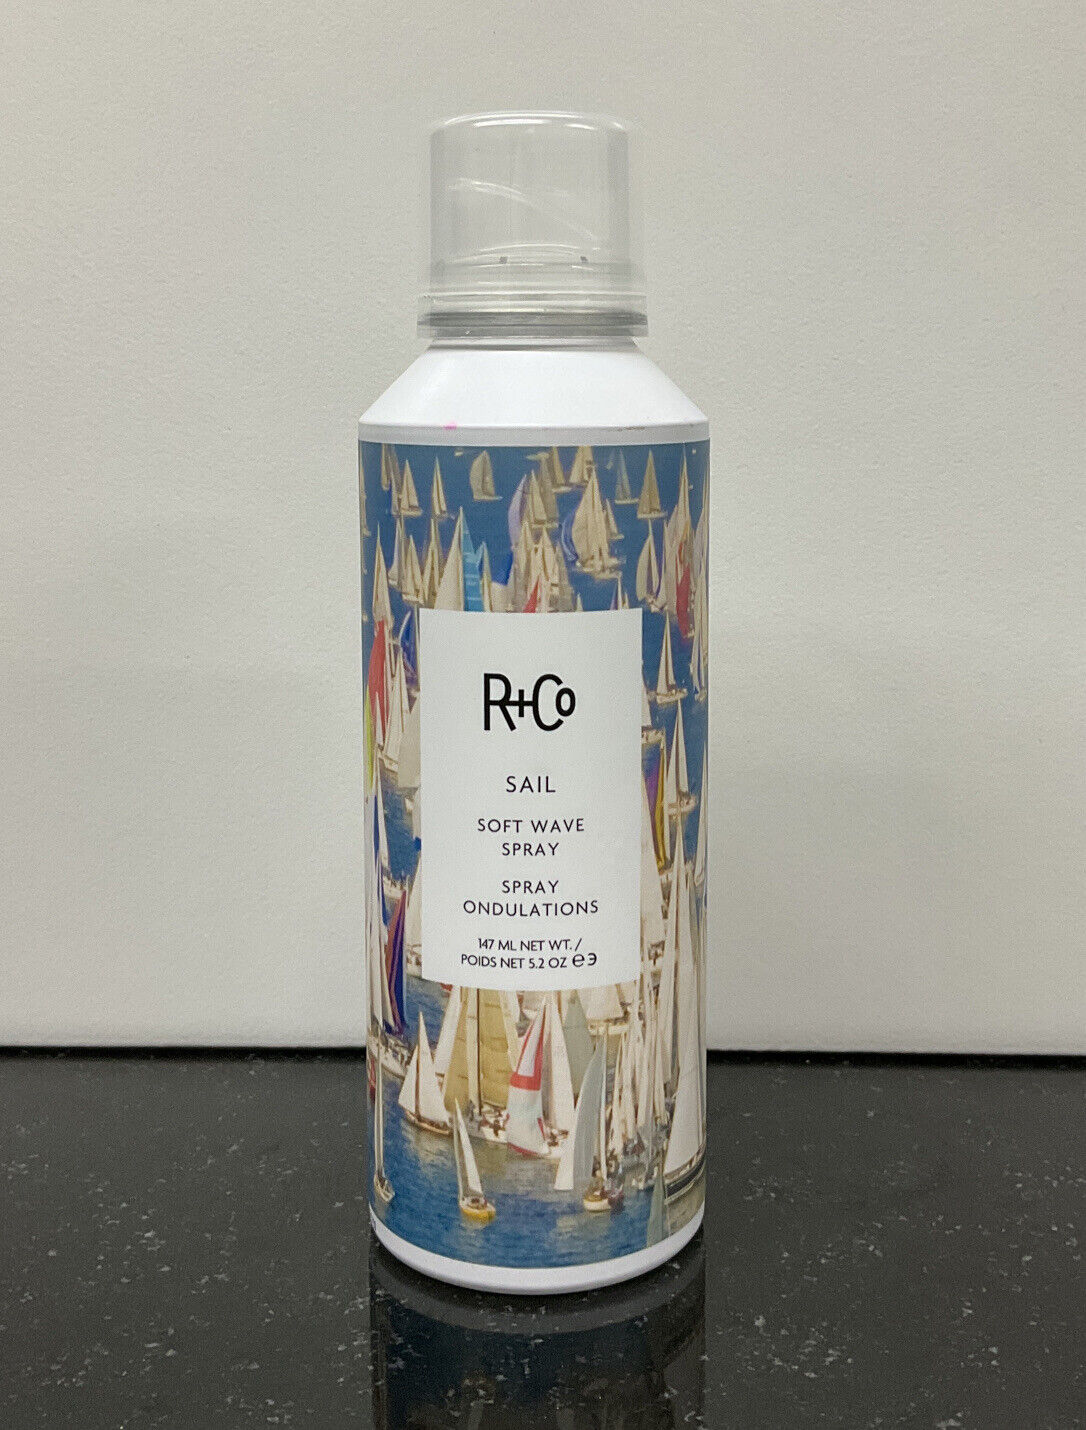 R+Co Sail Soft Wave Spray 5.2oz/147ml as pictured